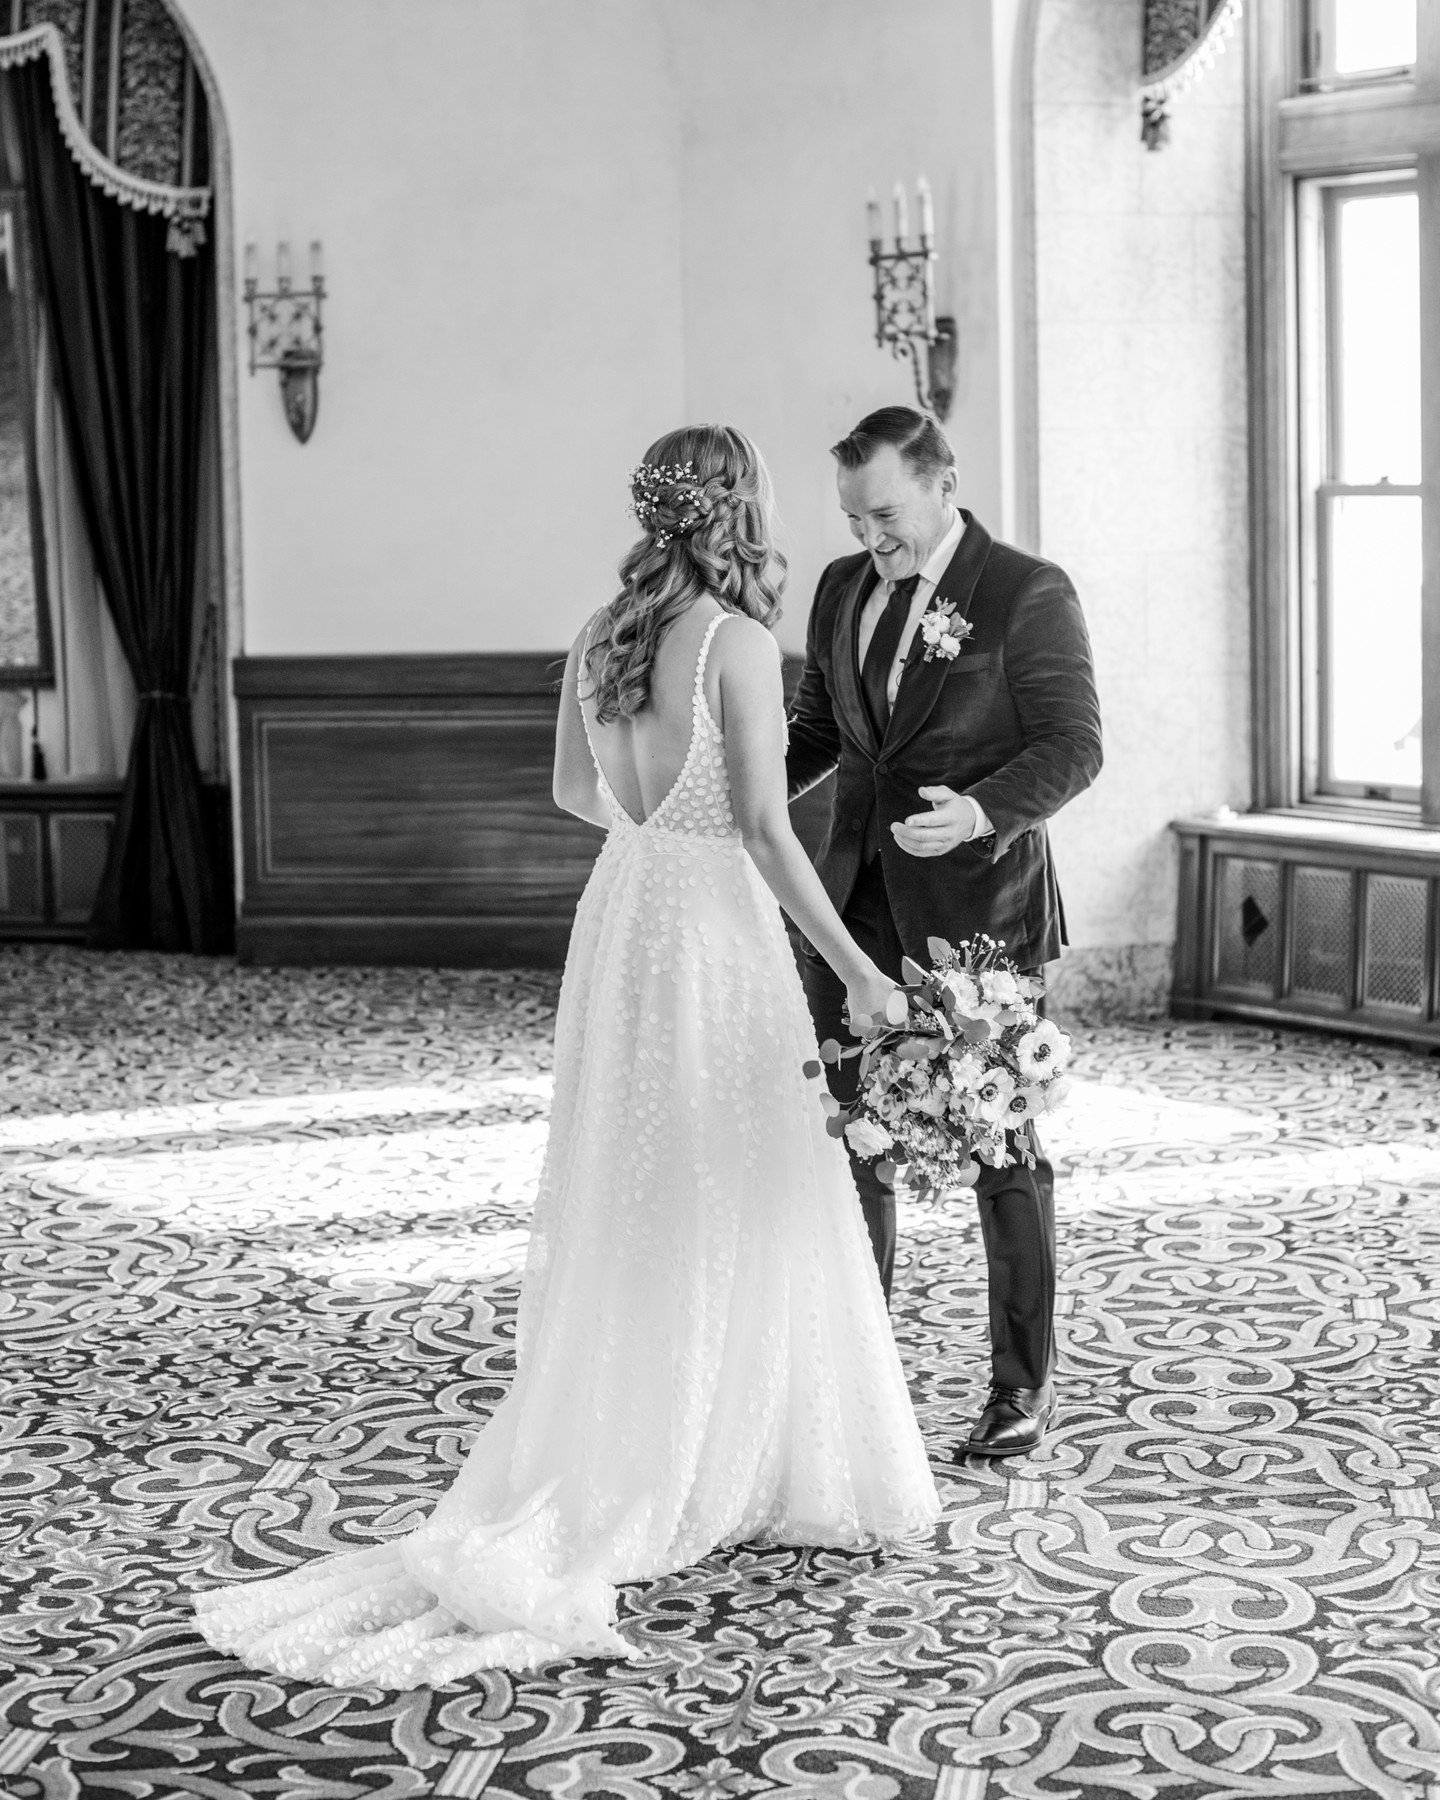 The First Look! 

Such a great intimate part of your day as well when you're dealing with daylight restrictions for a winter wedding I always suggest doing a first look.
#firstlookwedding #firstlook